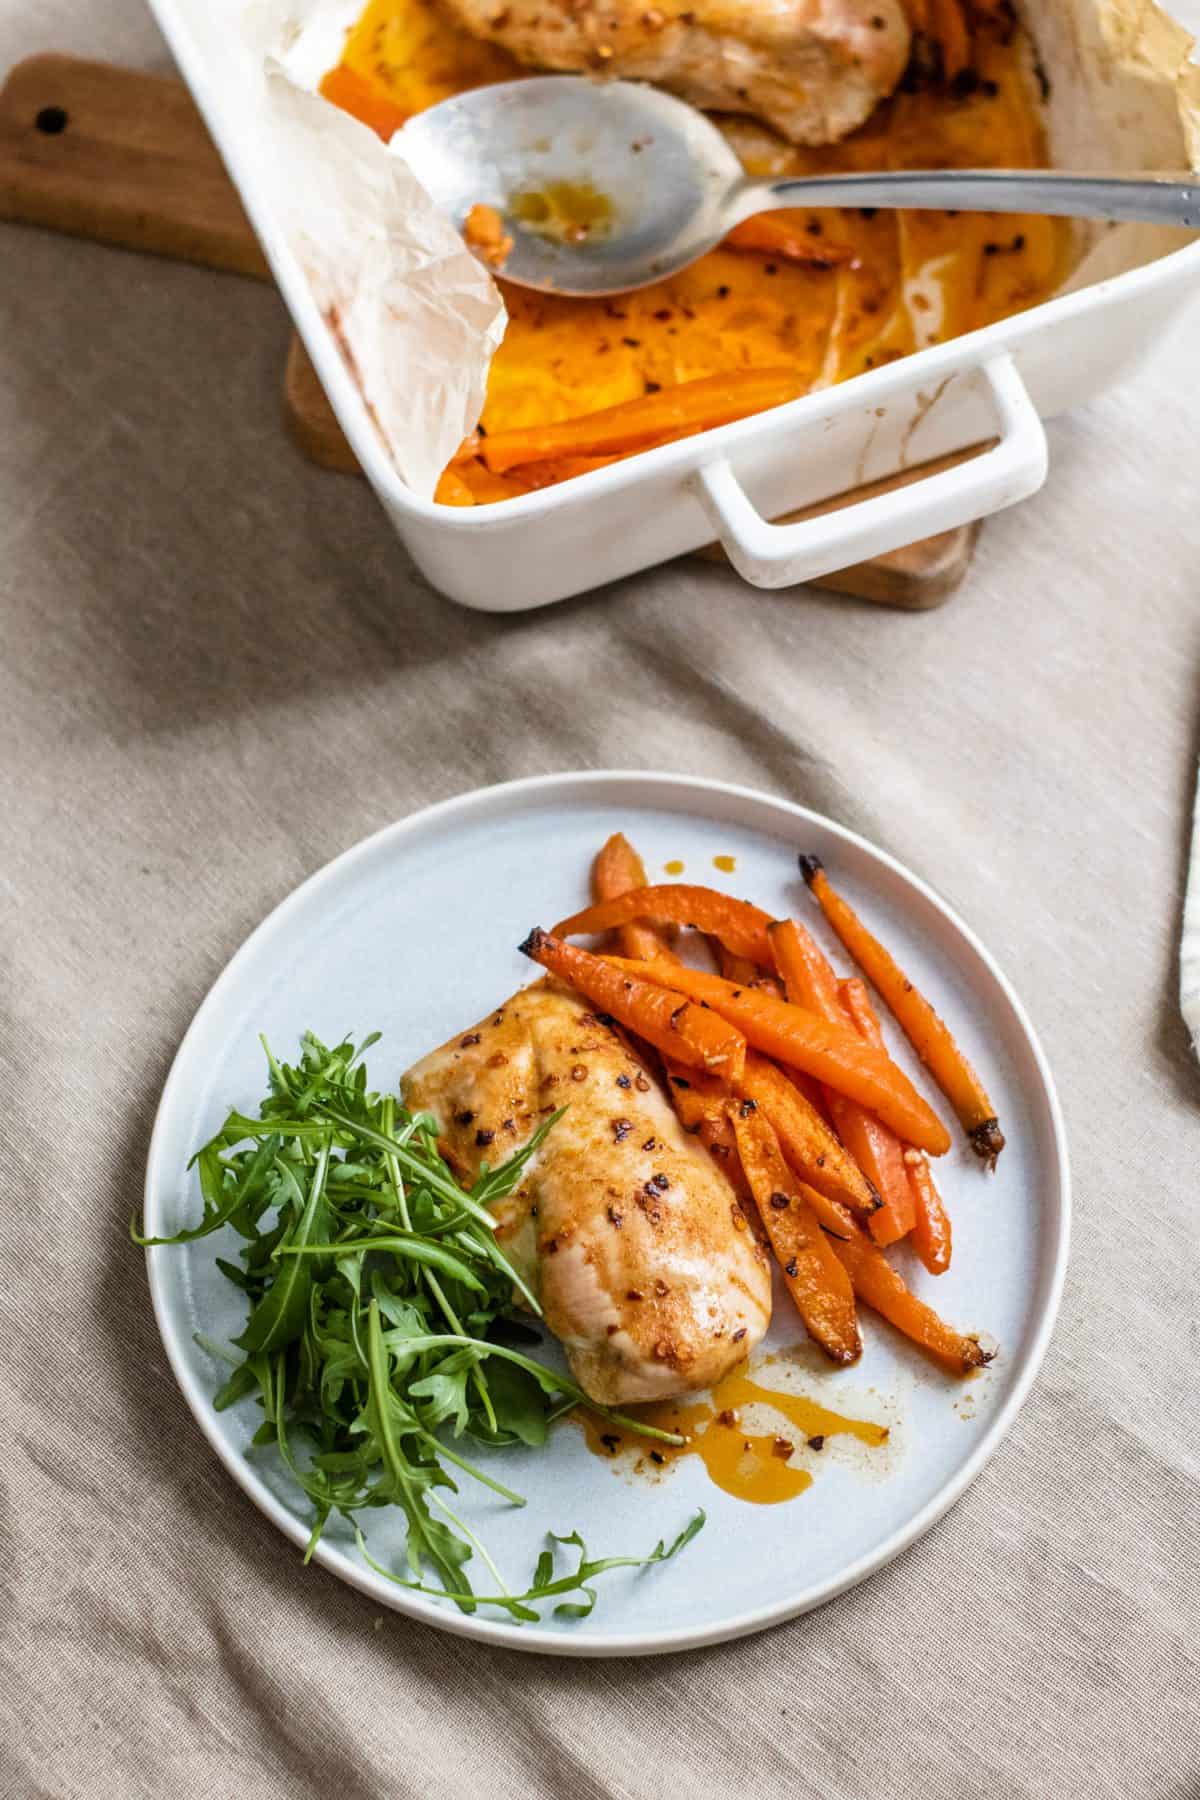 Spicy roasted chicken and carrots with a green salad on a white plate